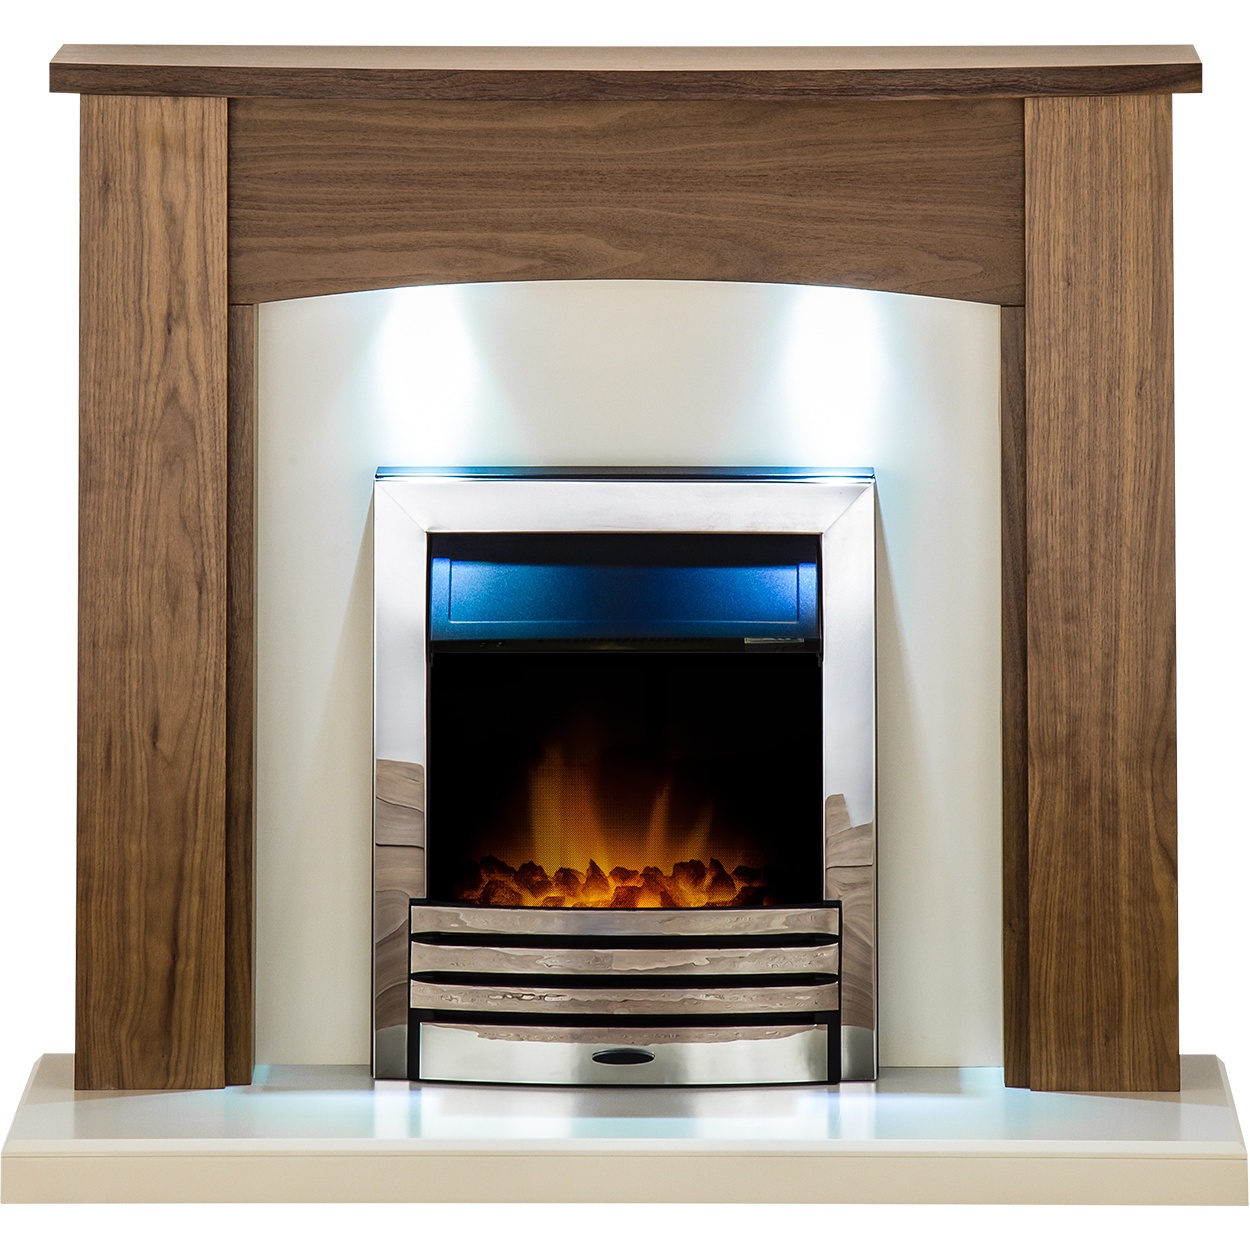 Glass Electric Fireplace New Details About Adam Fireplace Suite Walnut & Eclipse Electric Fire Chrome and Downlights 48"